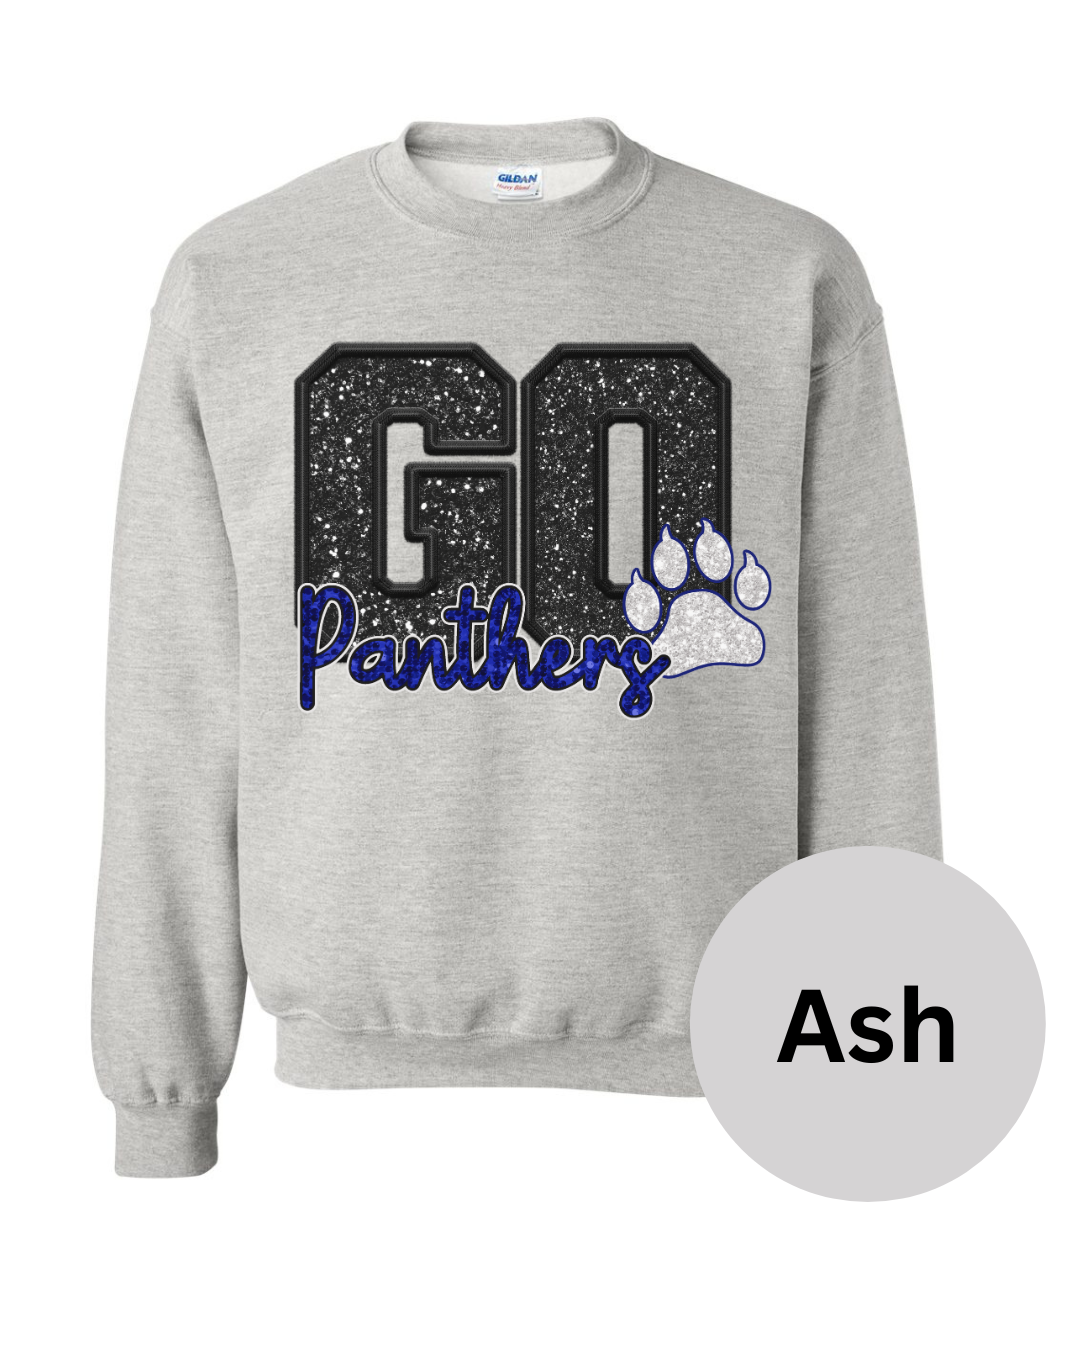 Faux Glitter/Sequins/Embroidery Go Panthers Crewneck